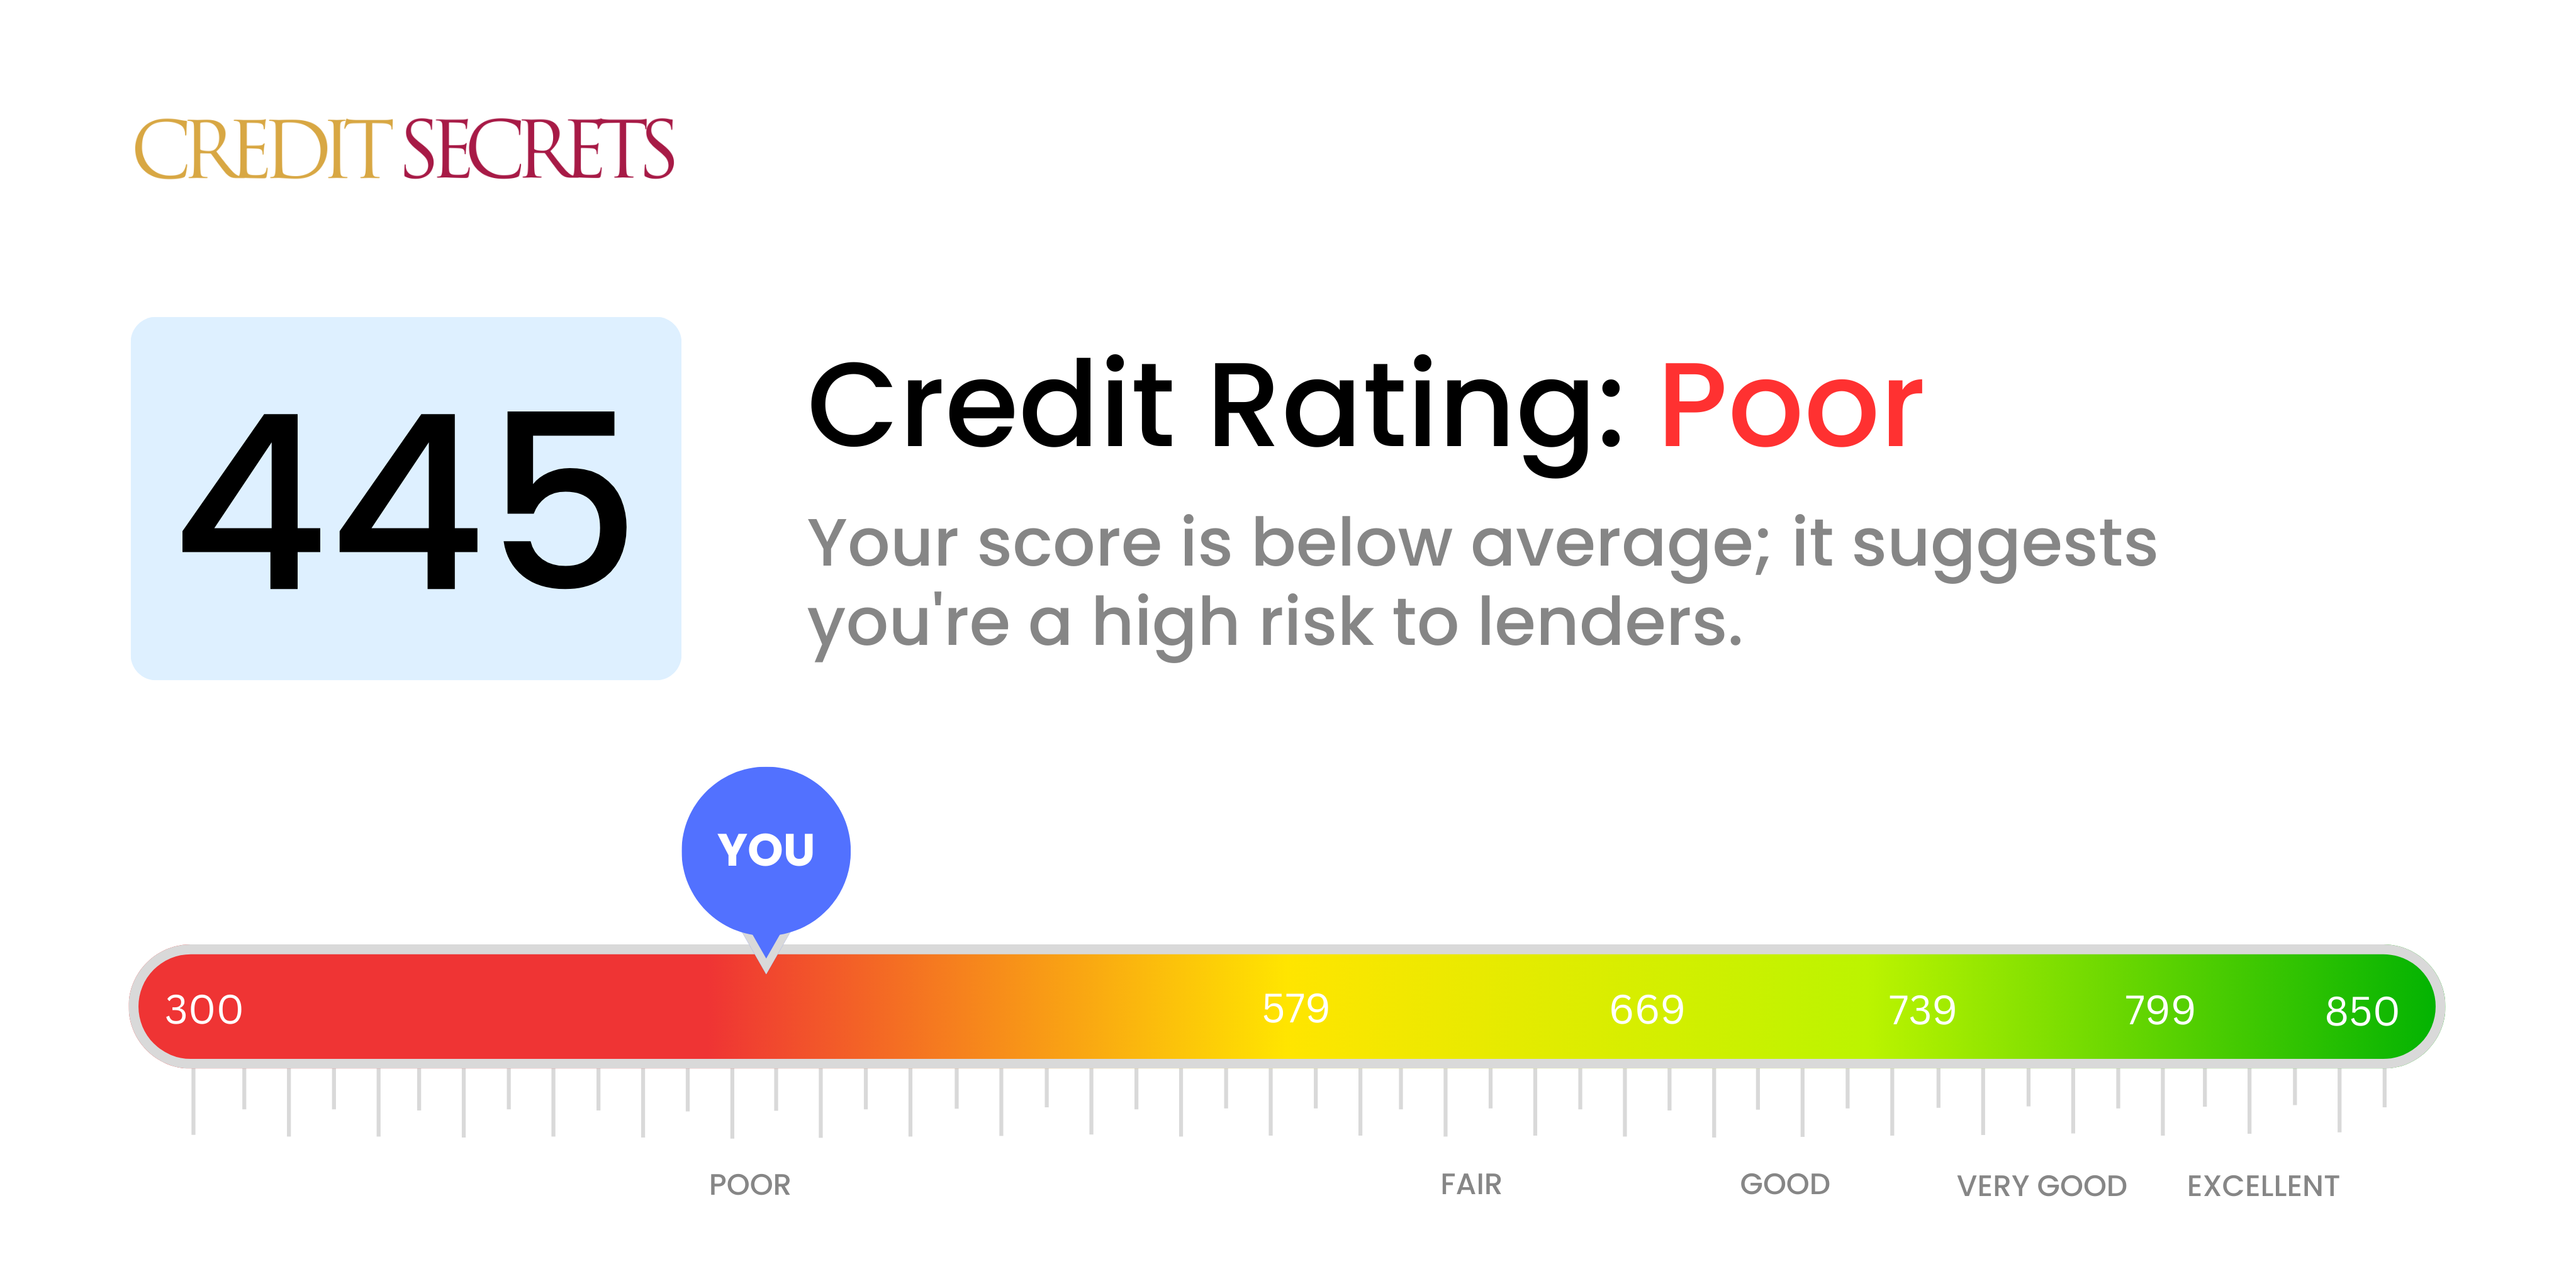 Is 445 a good credit score?